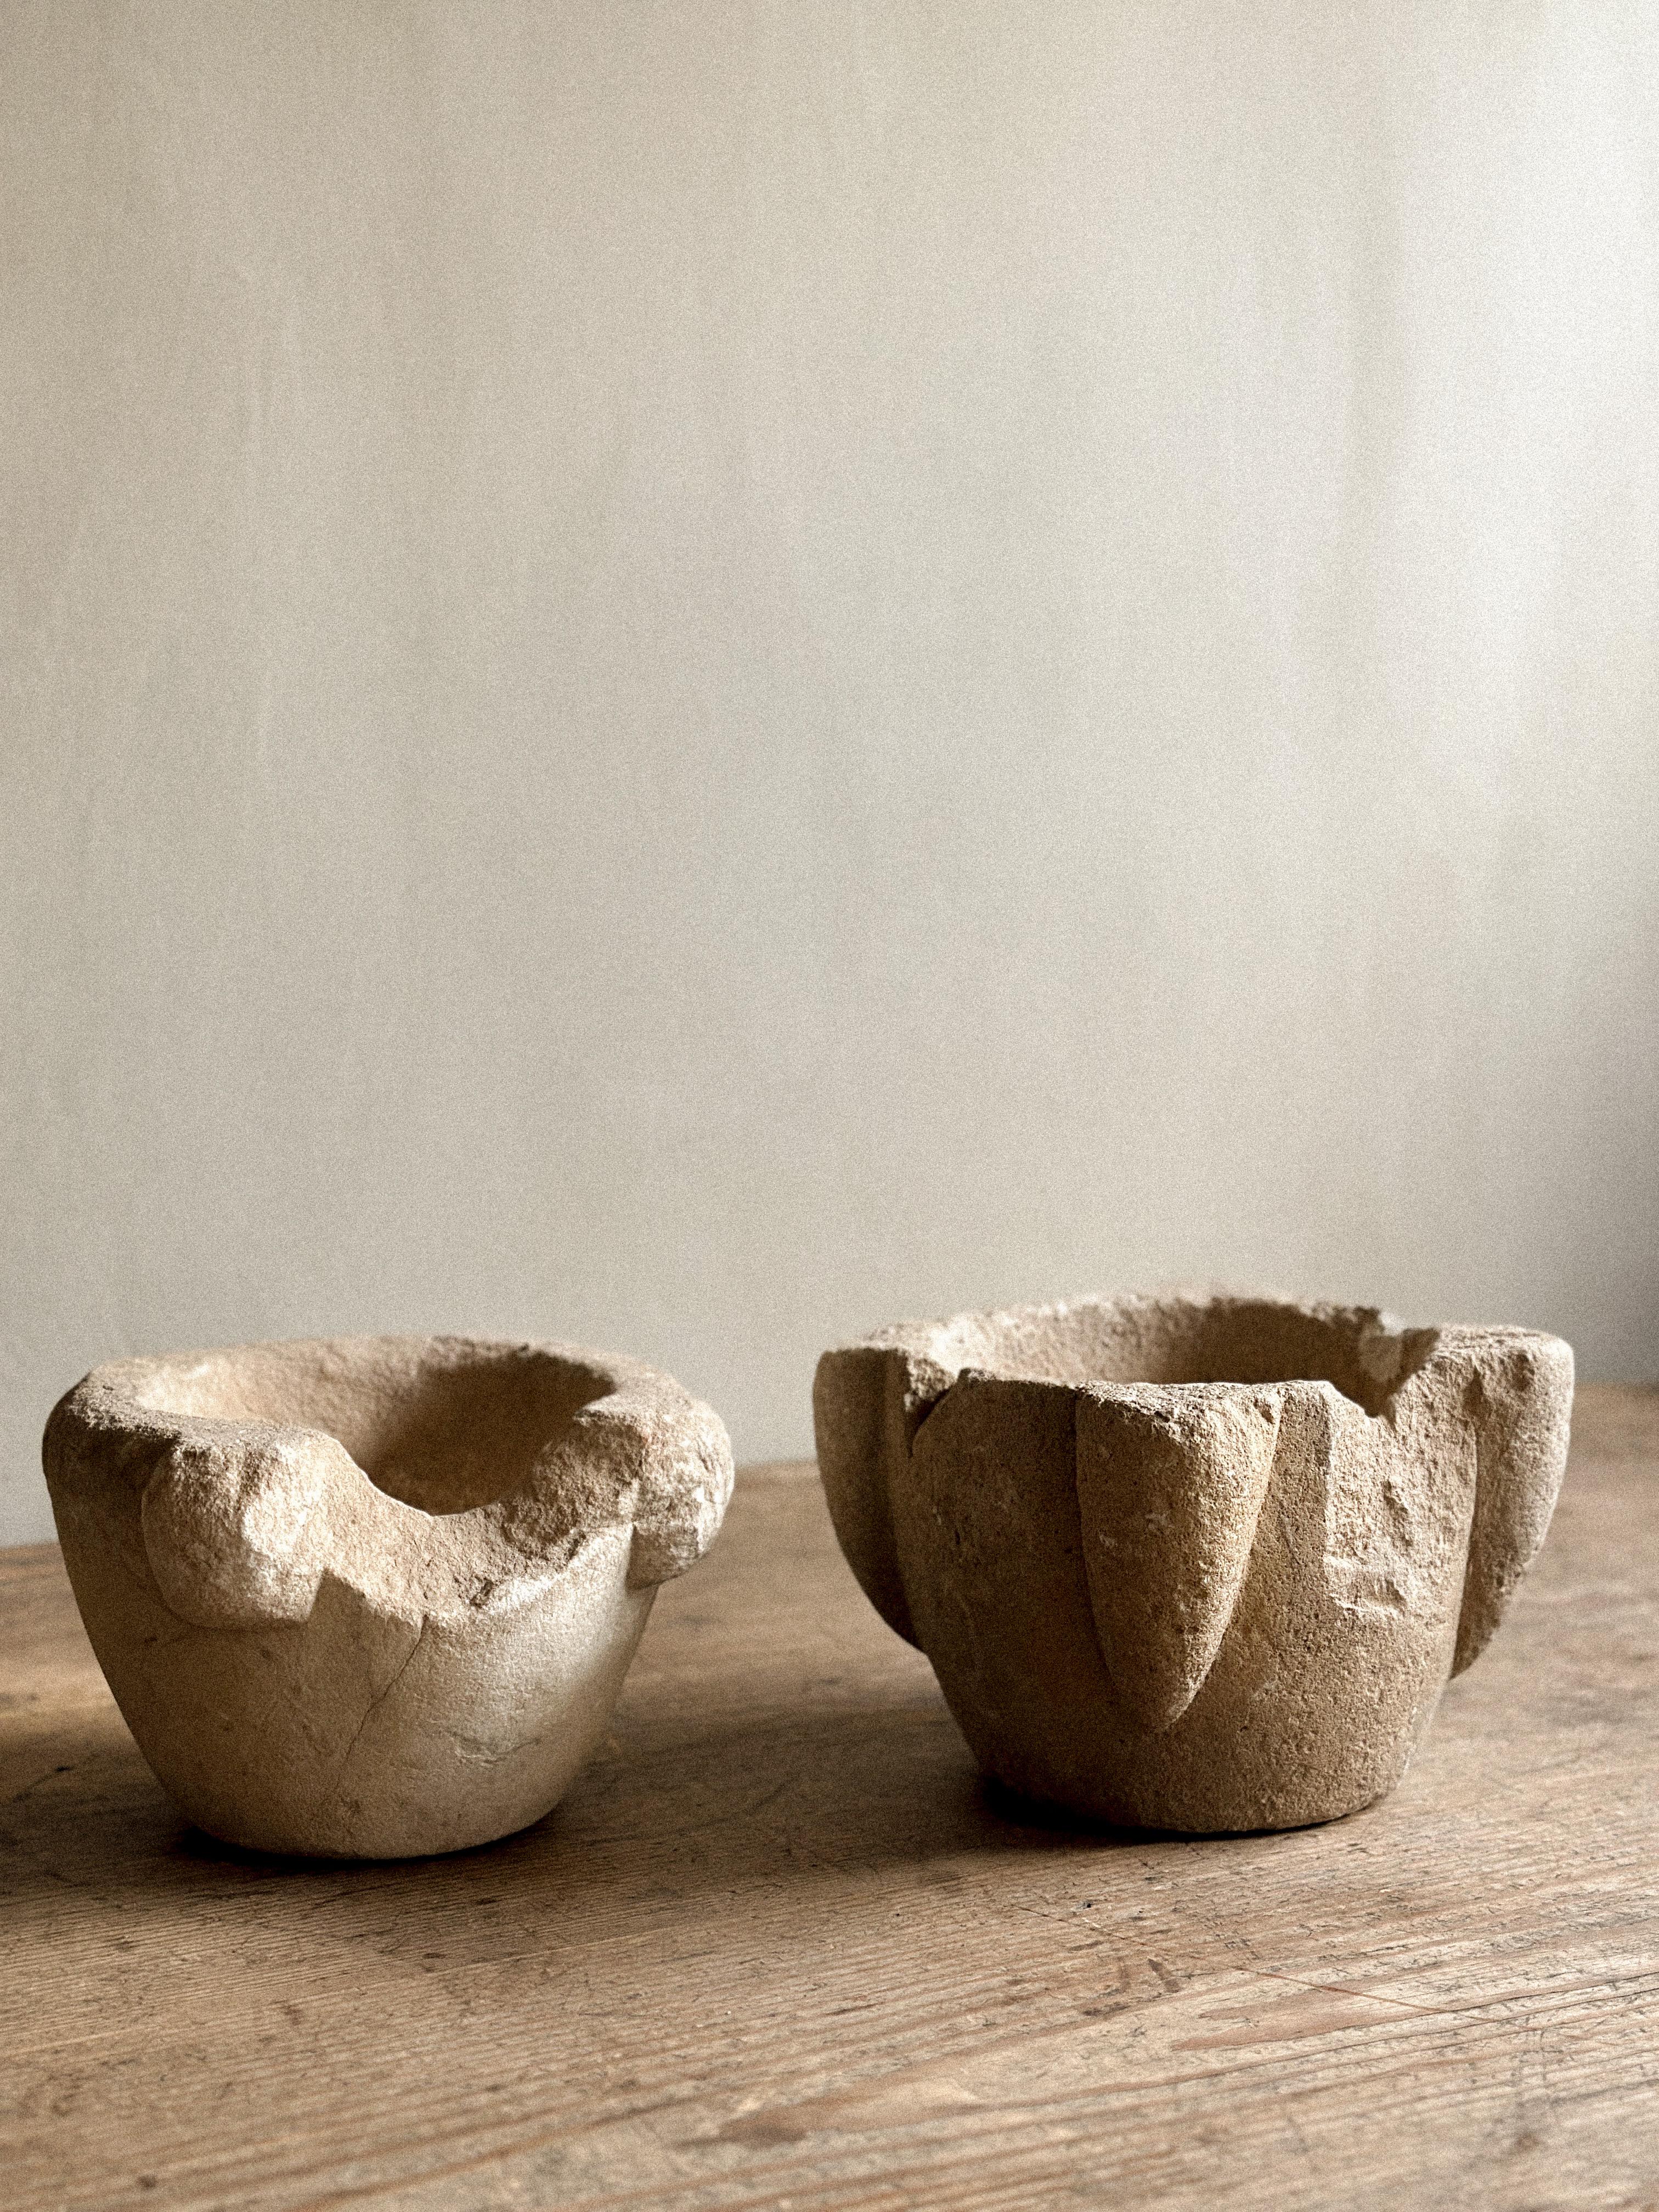 A Duo of Primitive Wabi Sabi Hand-Carved Stone Mortars, Spain, Early 1900s In Good Condition For Sale In Hønefoss, 30